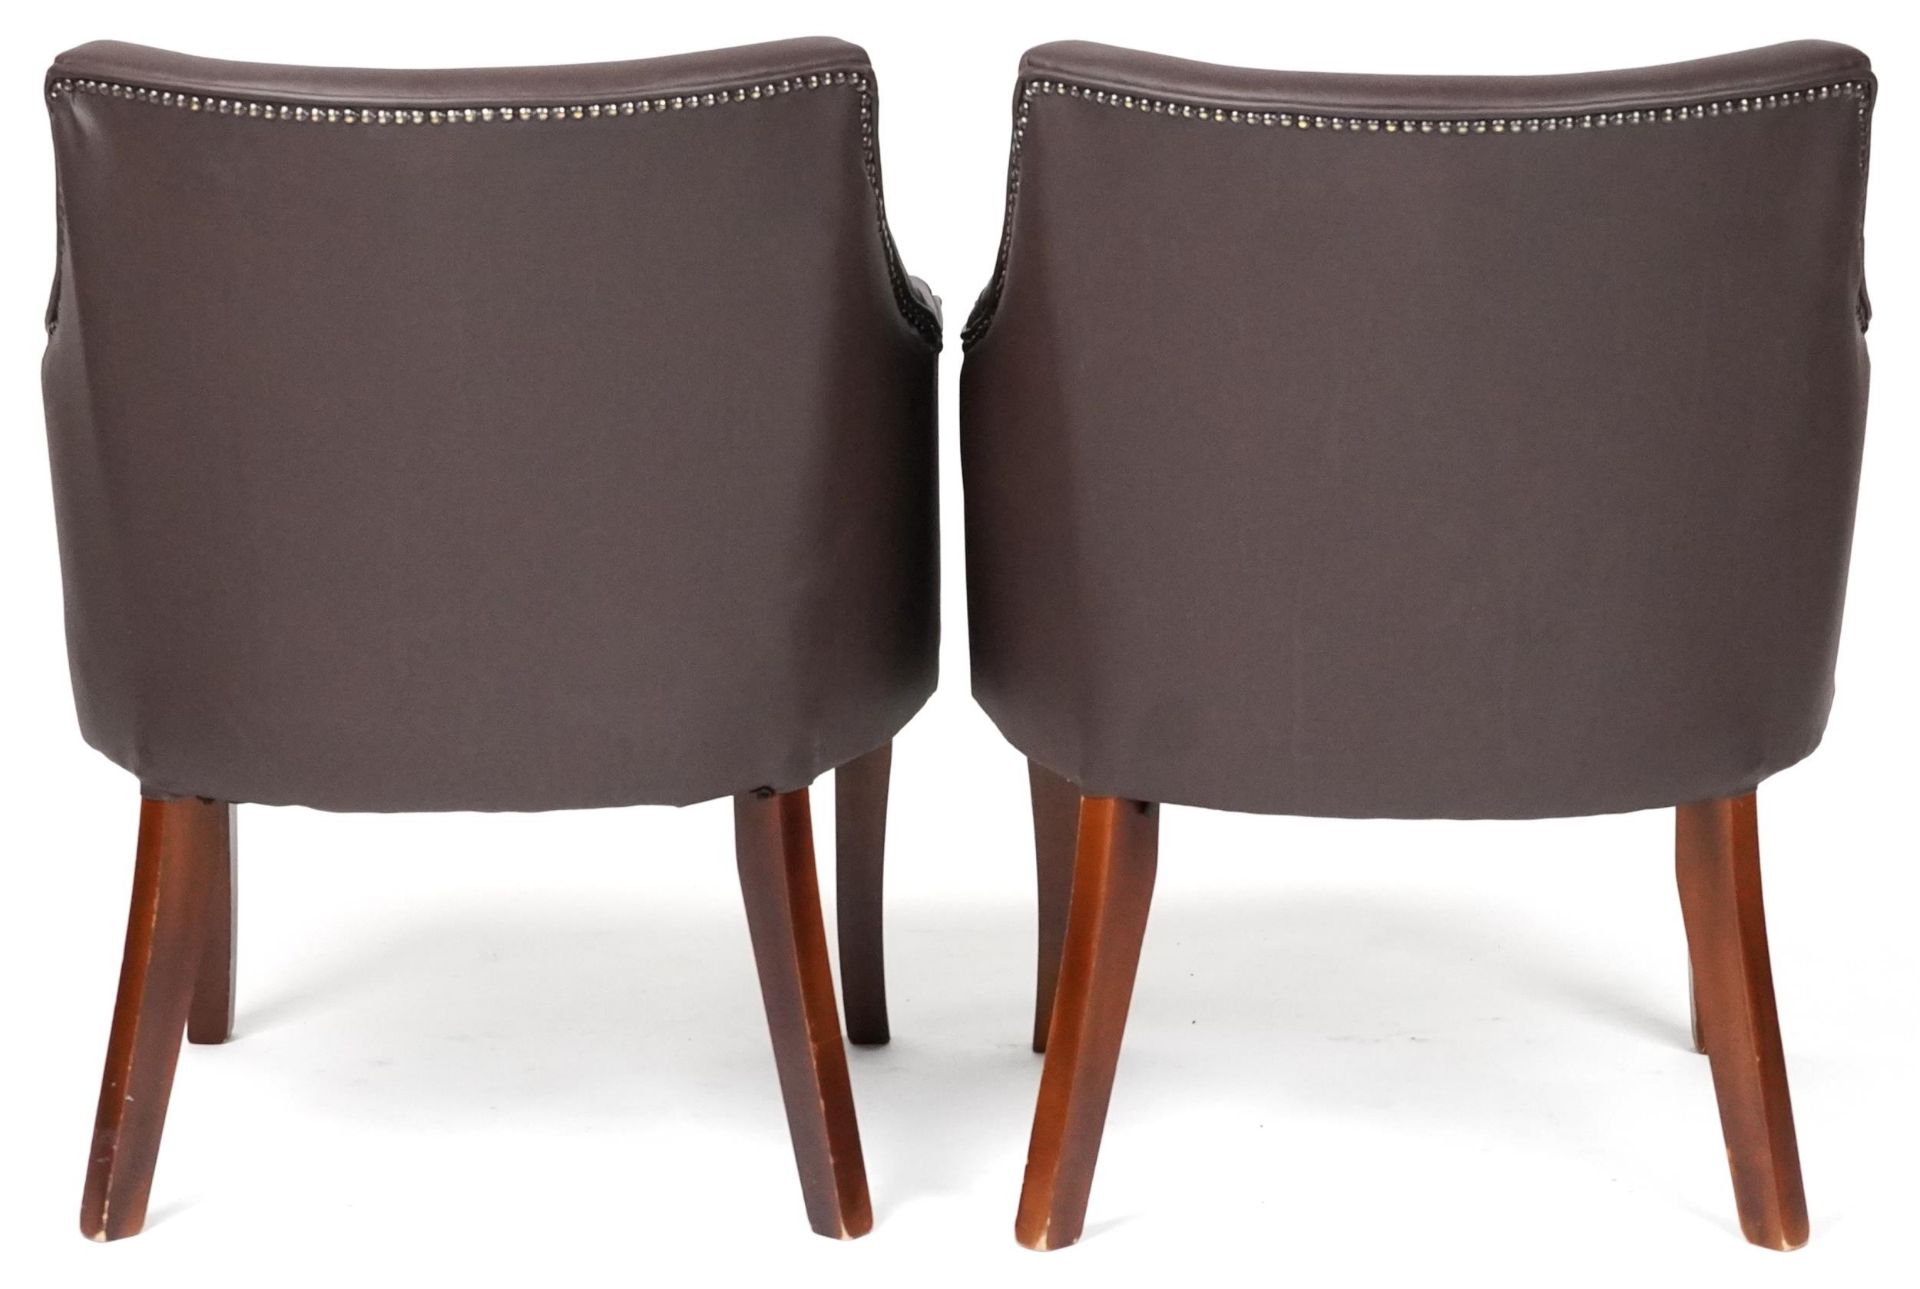 Pair of contemporary brown faux leather tub chairs, each 76cm high - Image 4 of 4